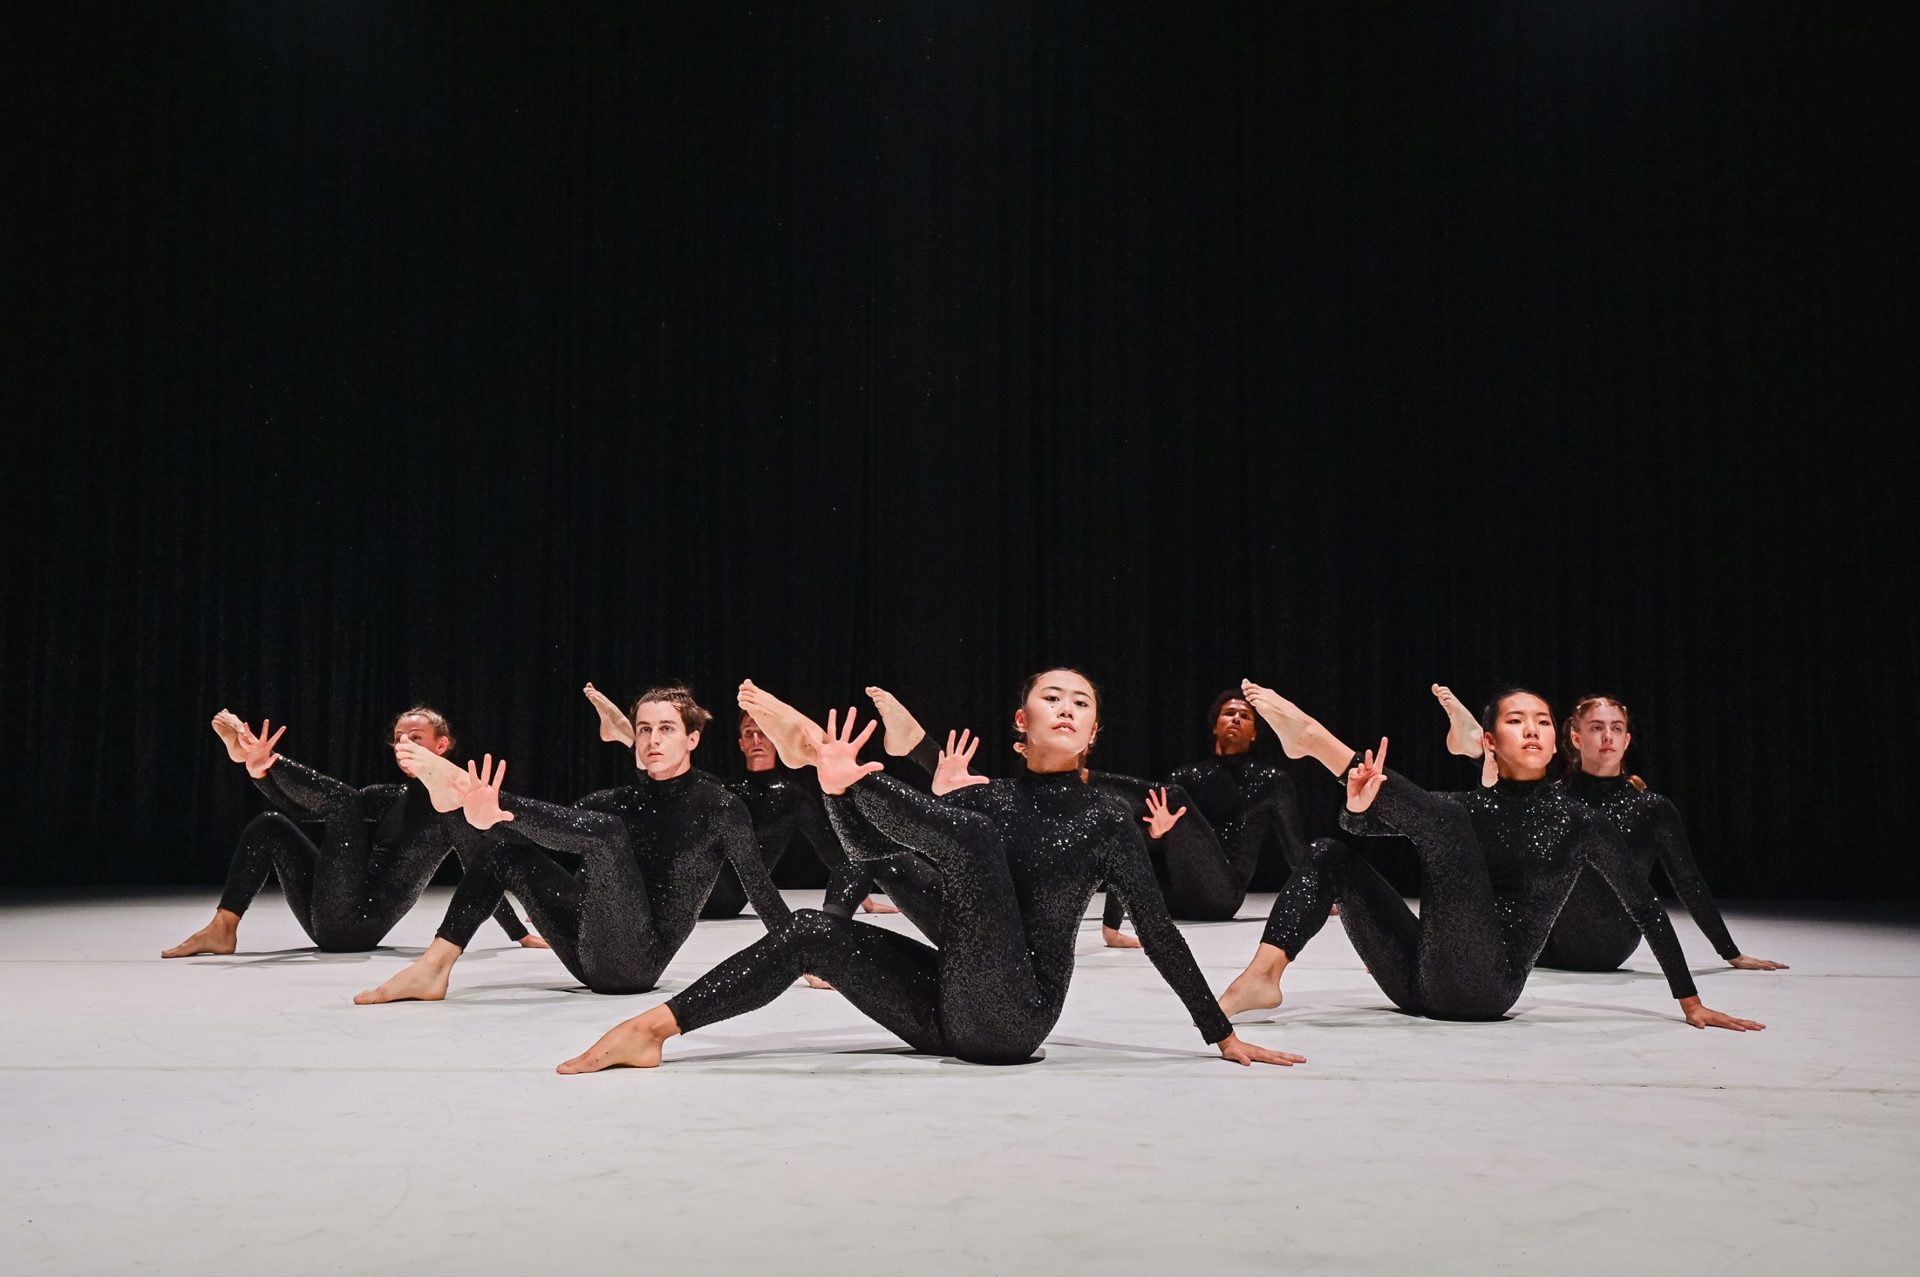 Seven dancers sat on the floor holding a leg up to the left of the image with the other leg bent with one hand on the white floor . Wearing black sequin bodysuits, with a black background 